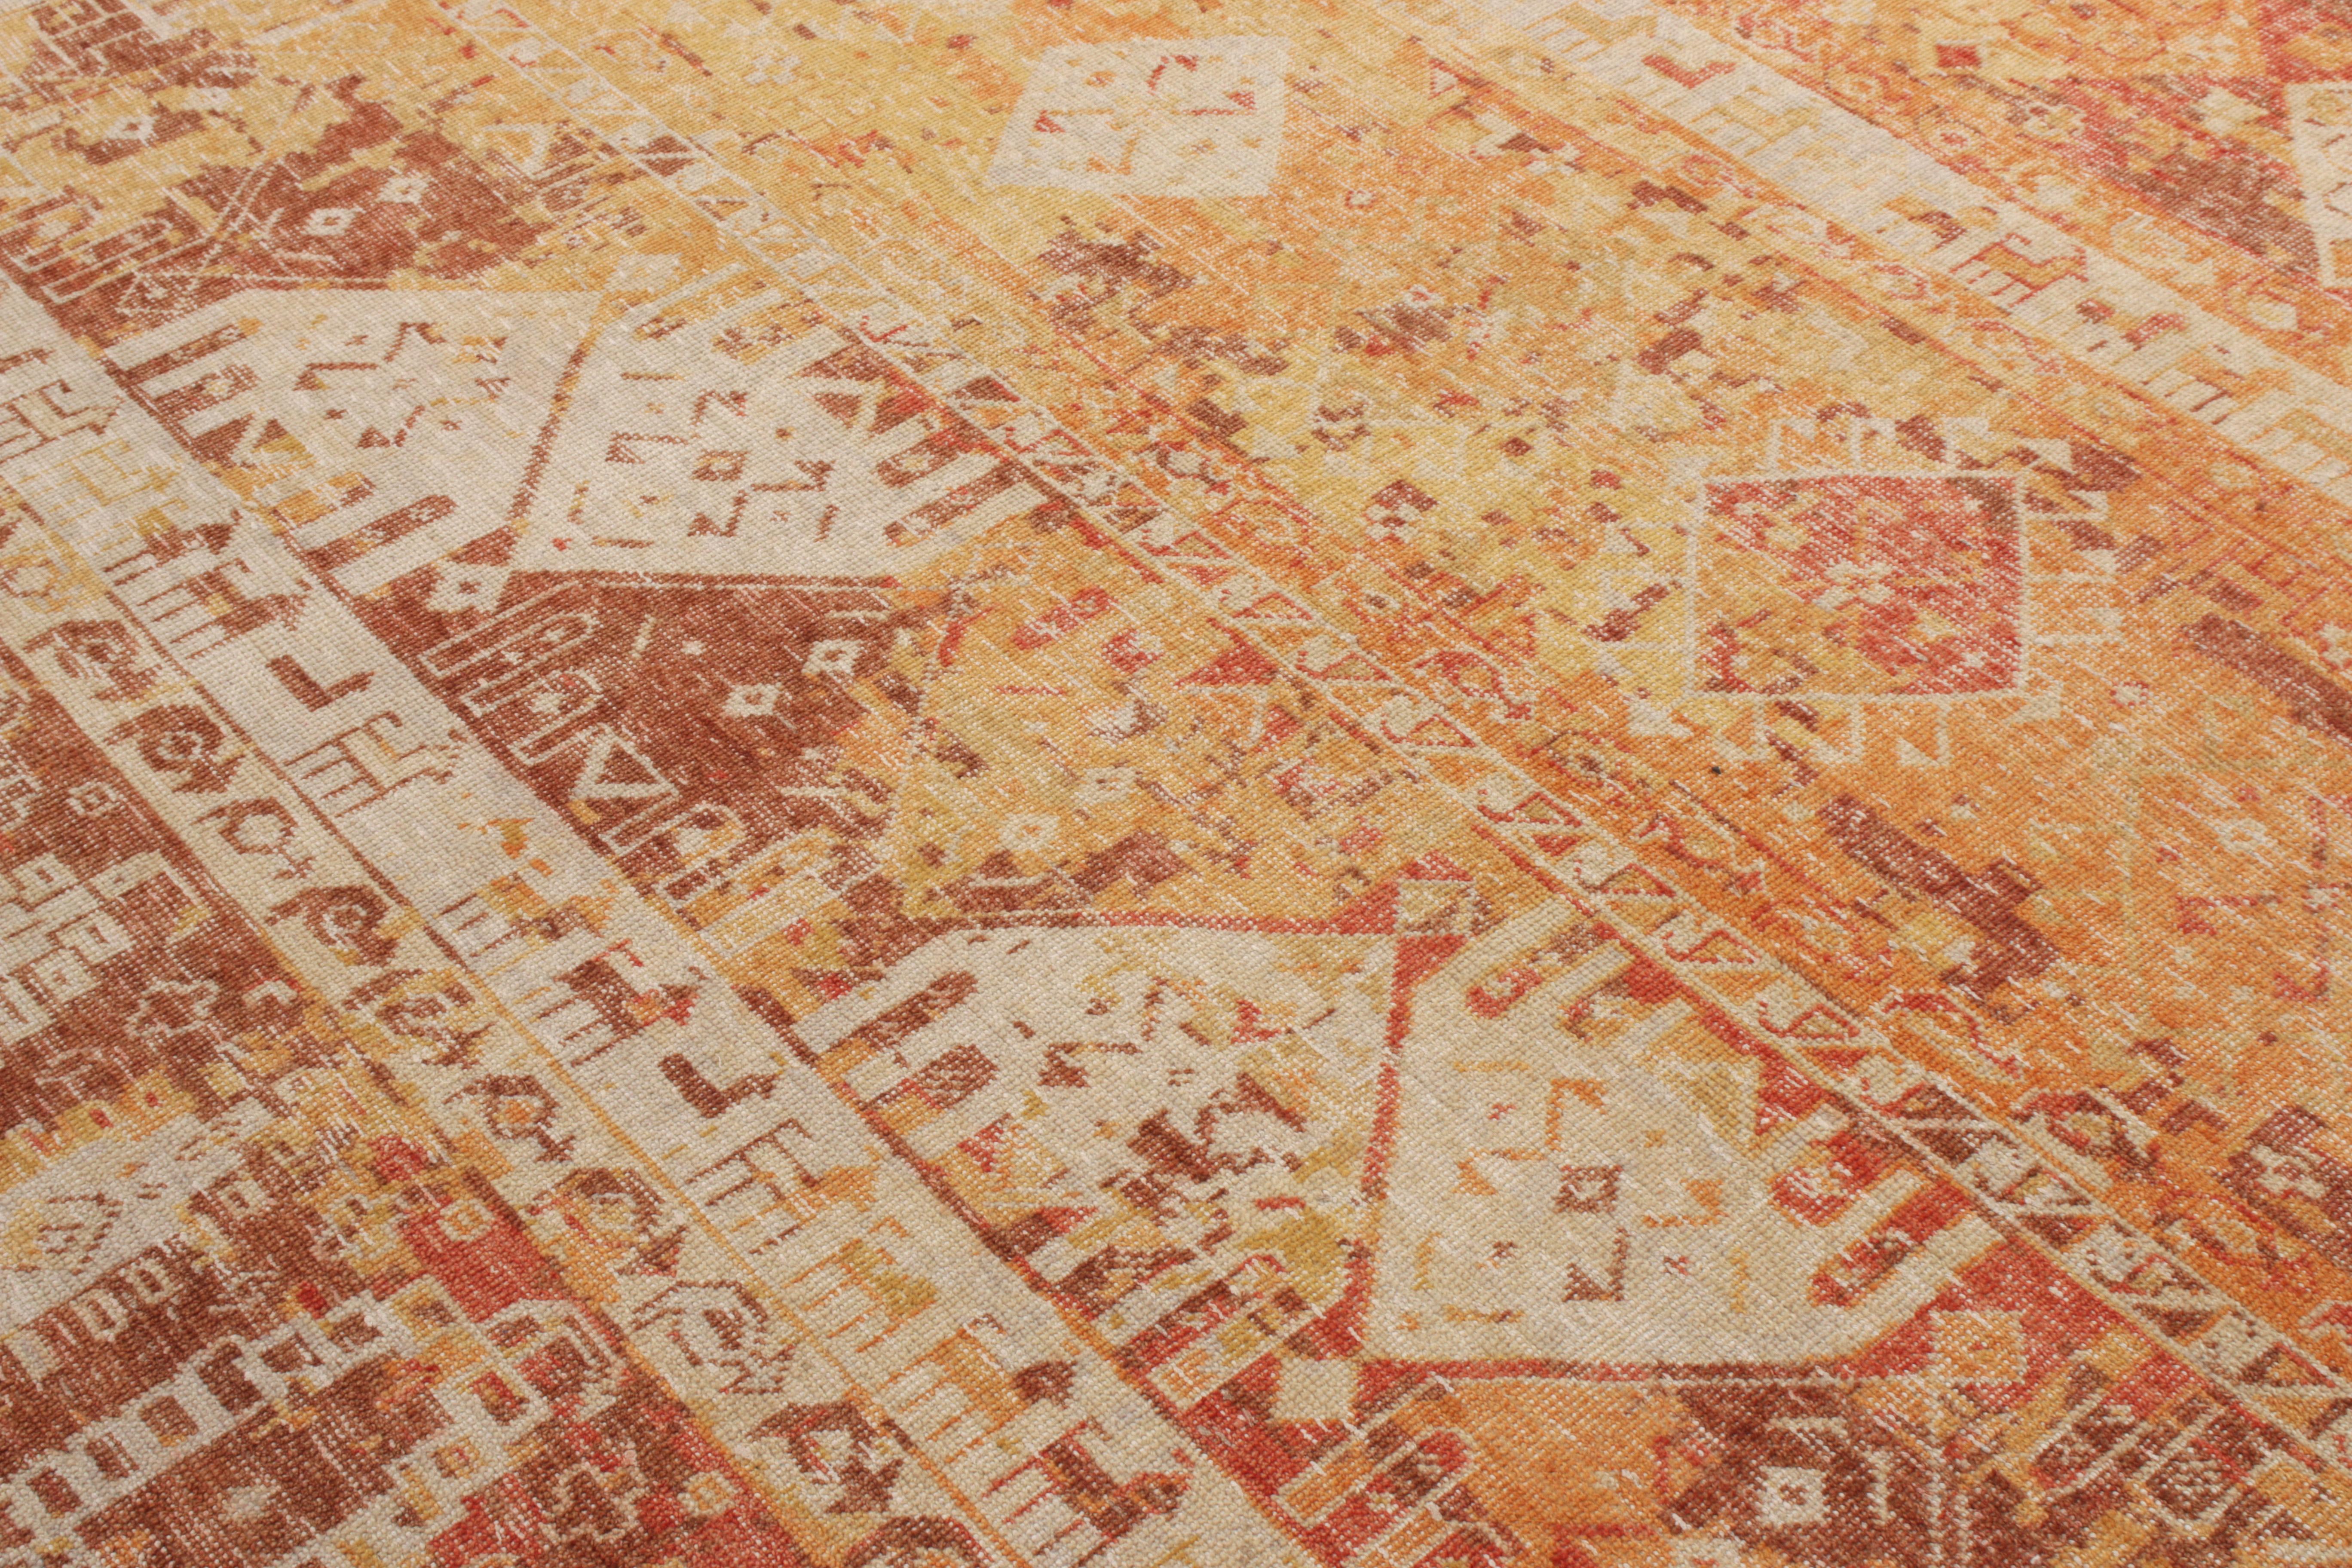 Hand-Knotted Rug & Kilim’s Distressed Tribal Style Rug in Orange-Red, Beige Geometric Pattern For Sale